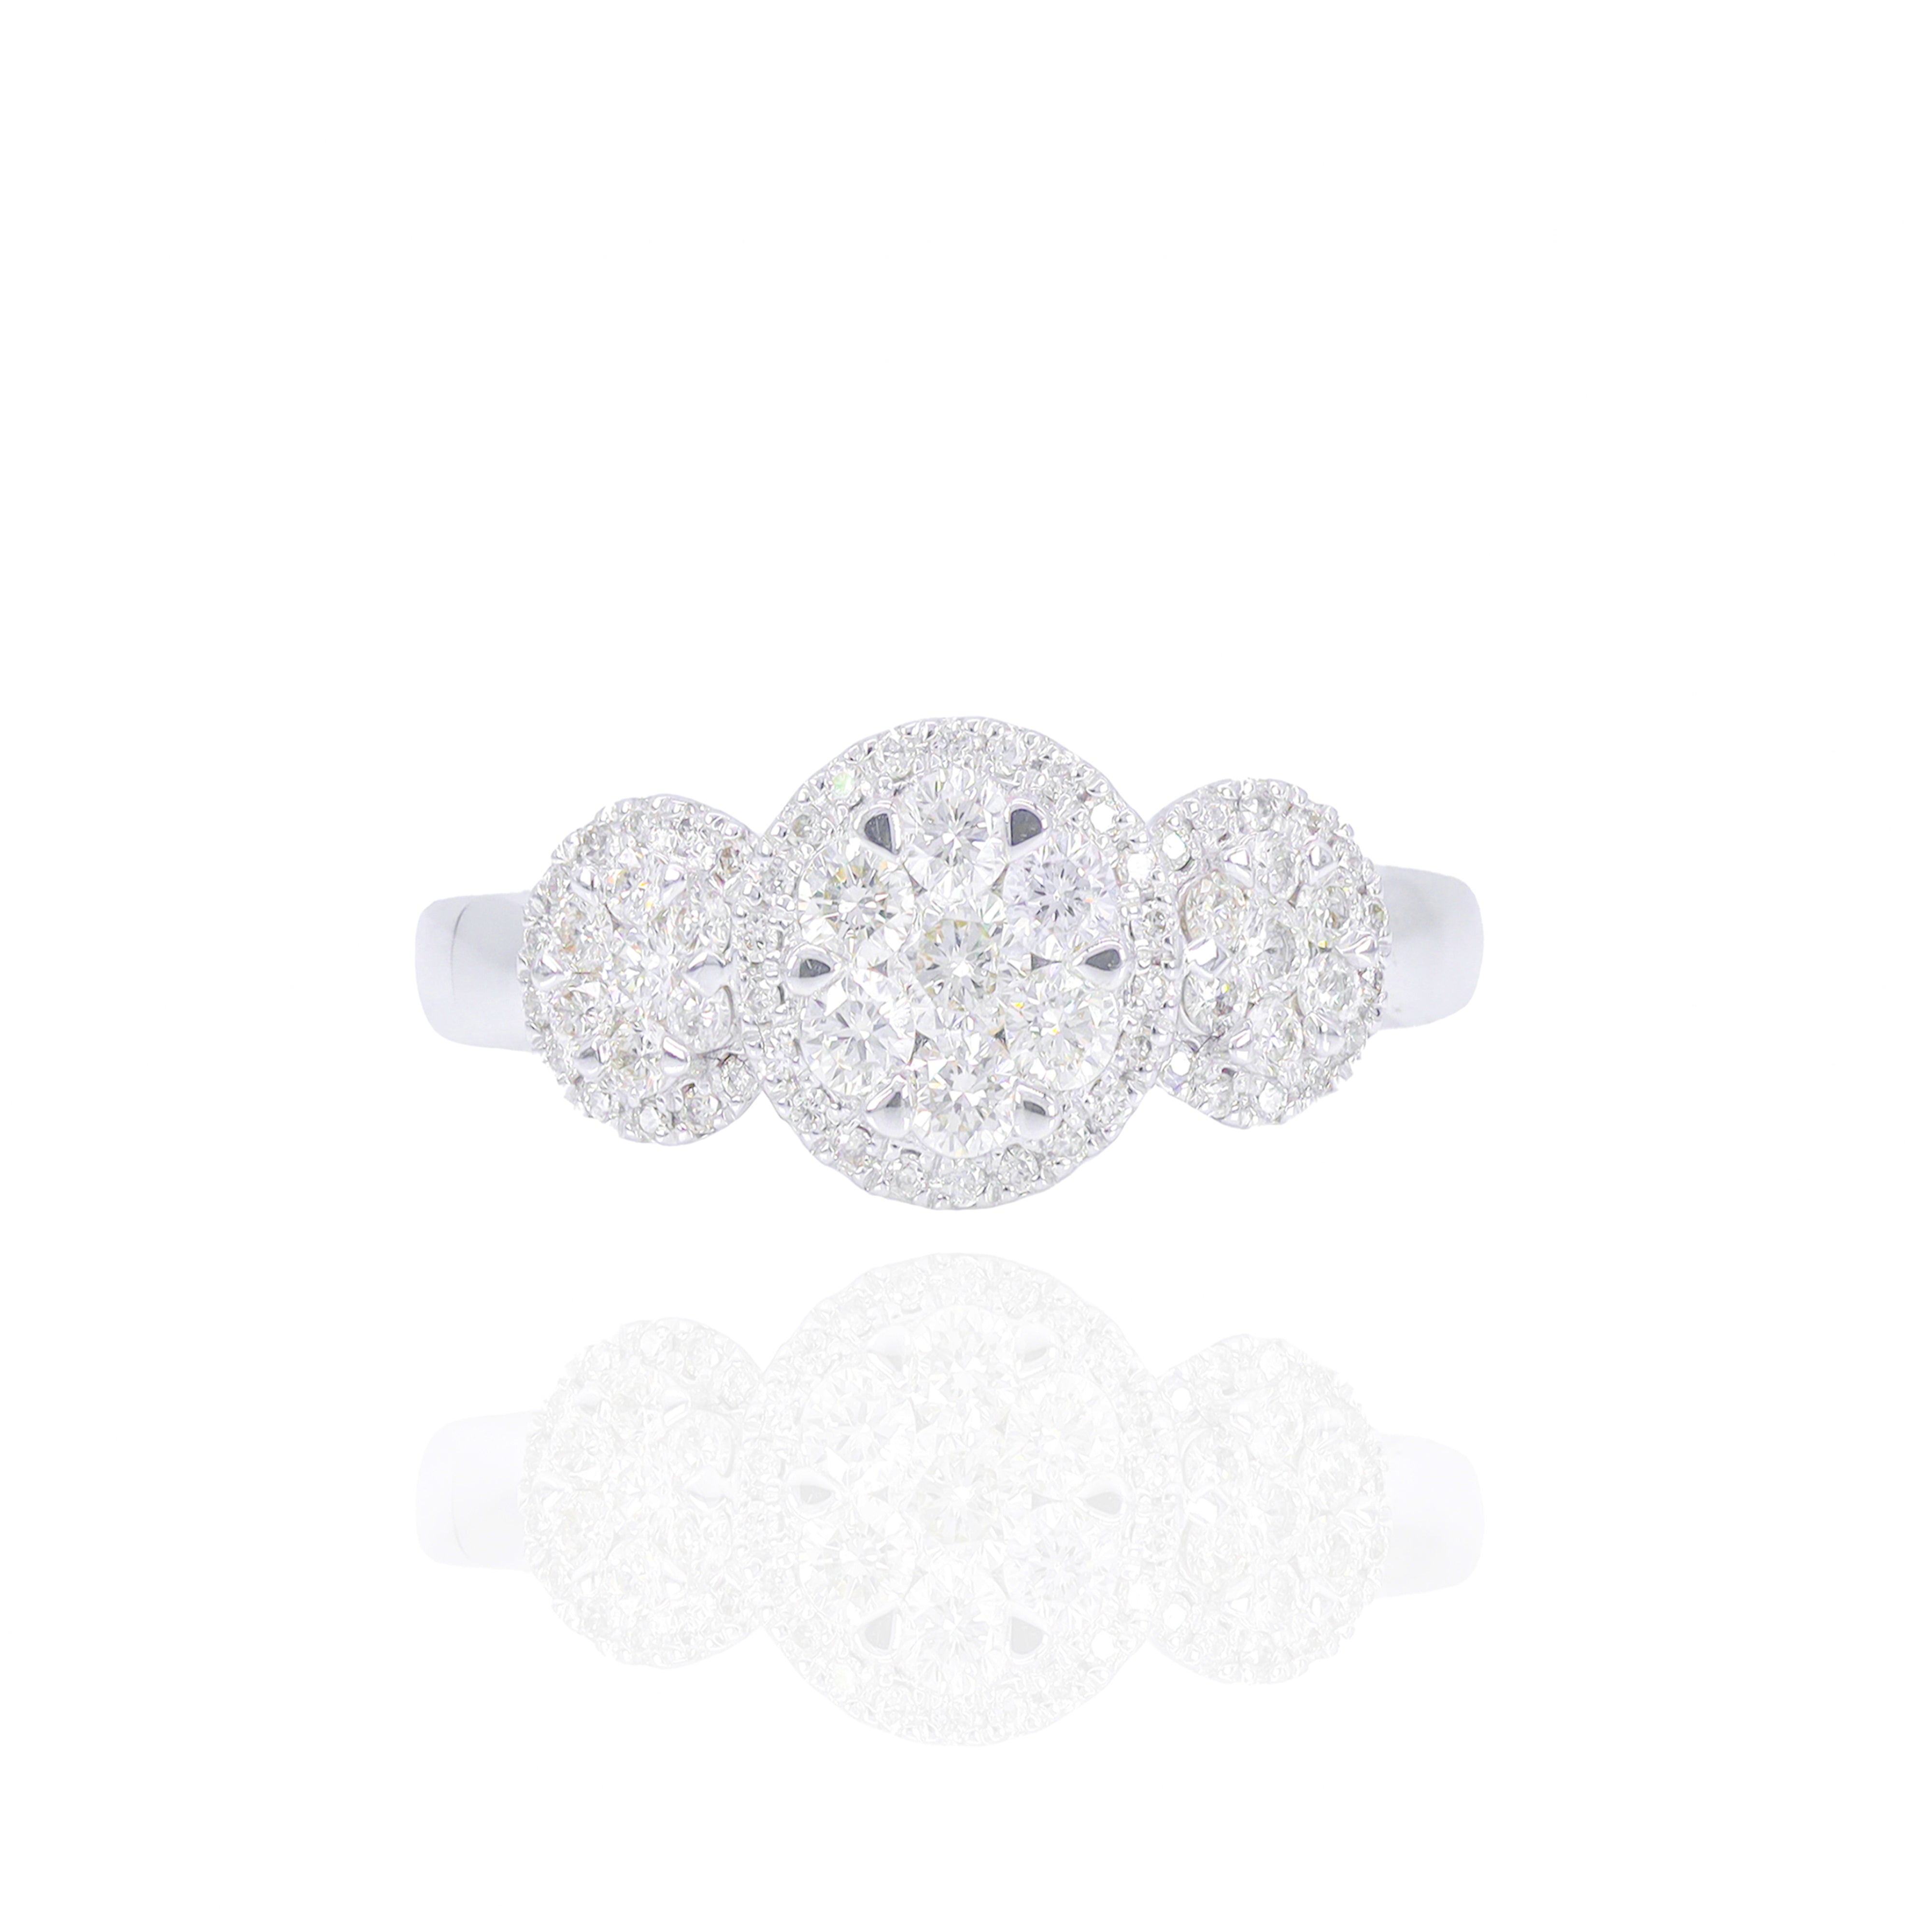 3 Sectional Cluster Diamond Ring